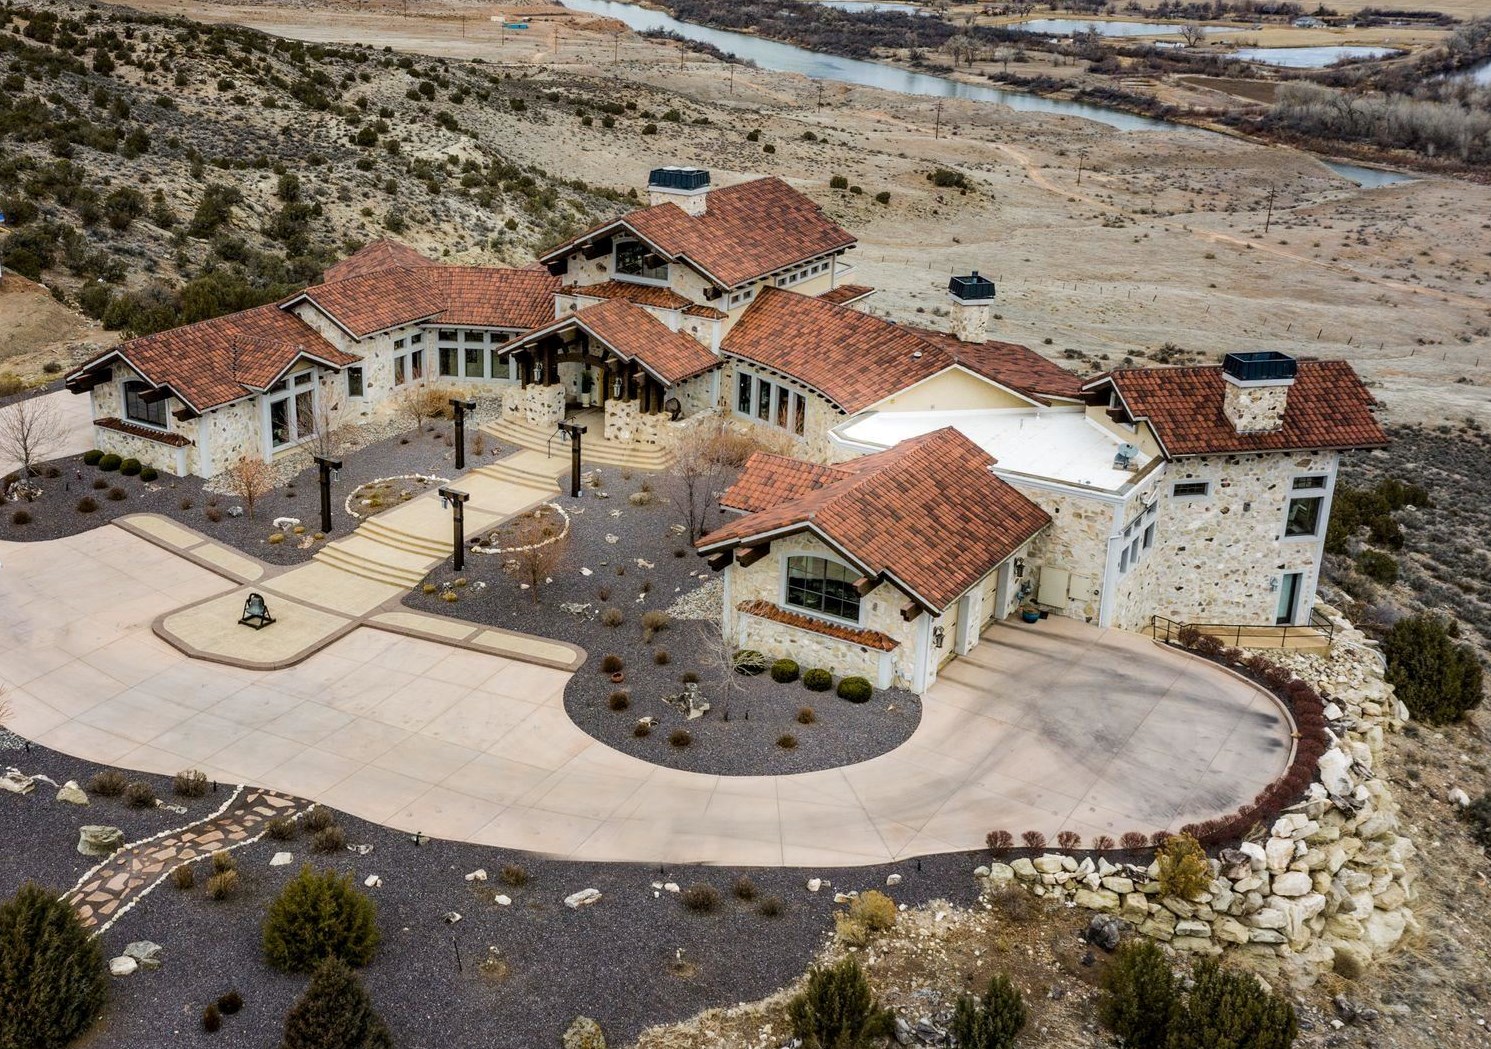 Do not miss your opportunity to own this captivating and timeless Grand Junction Estate. Nestled on 2.35 acres and breathtaking 360-degree views. Inside you will find dramatic 34' tall ceilings, custom travertine floors, an astonishing stone, floor- to- ceiling fireplace, chef's dream kitchen complete with a butler kitchen. The owner's suite has a true retreat feel. The temperature controlled wine room is sure to  satisfy the fussiest wine collector. Every window is a picture perfect view of the cityscape, Colorado River, Colorado National Monument, The Grand Mesa and the Bookcliff's. Downstairs you will find a game room, a custom Home Theatre and a 6 person steam room. The guest wing features a powder room, 2 guest suites (each with en suites) and private entrances. The home has 2 garages on opposite ends of the home. The house was built in 2006 and took over two years to complete. The stone was quarried on site. The home runs on Geothermal for heating and cooling and the exterior walls are 12" thick. Out back you will enjoy those stunning Colorado Sunsets on your ultra private patio. The  suspended patio overlooks the Colorado River and has full city views. This outdoor space is  complete with a fireplace, hot tub and room to entertain all your guests.